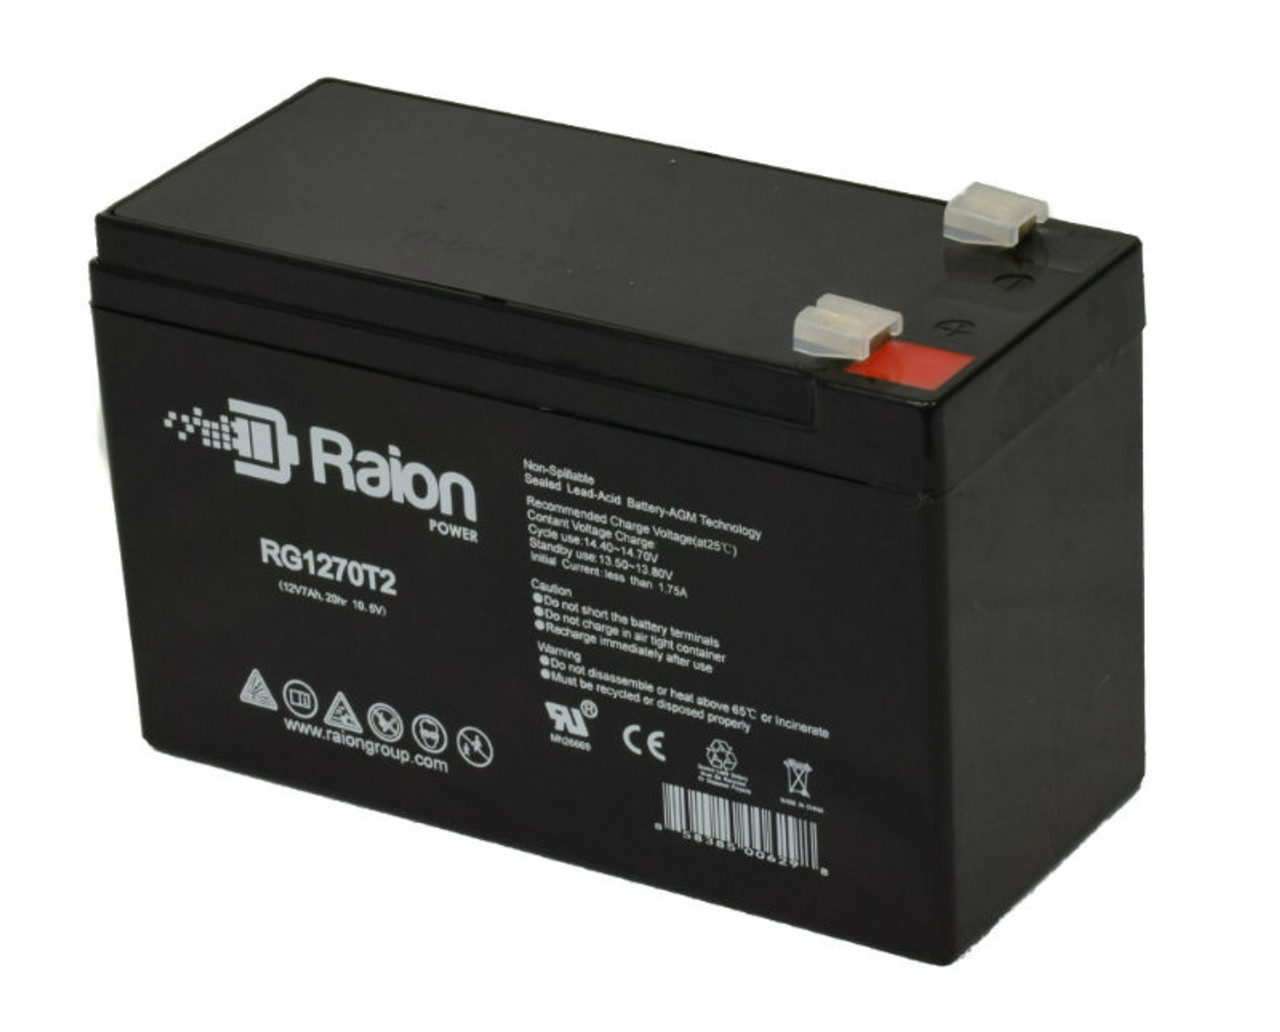 Raion Power RG1270T1 12V 7Ah Non-Spillable Replacement Battery for Duramp NP7-12 F1